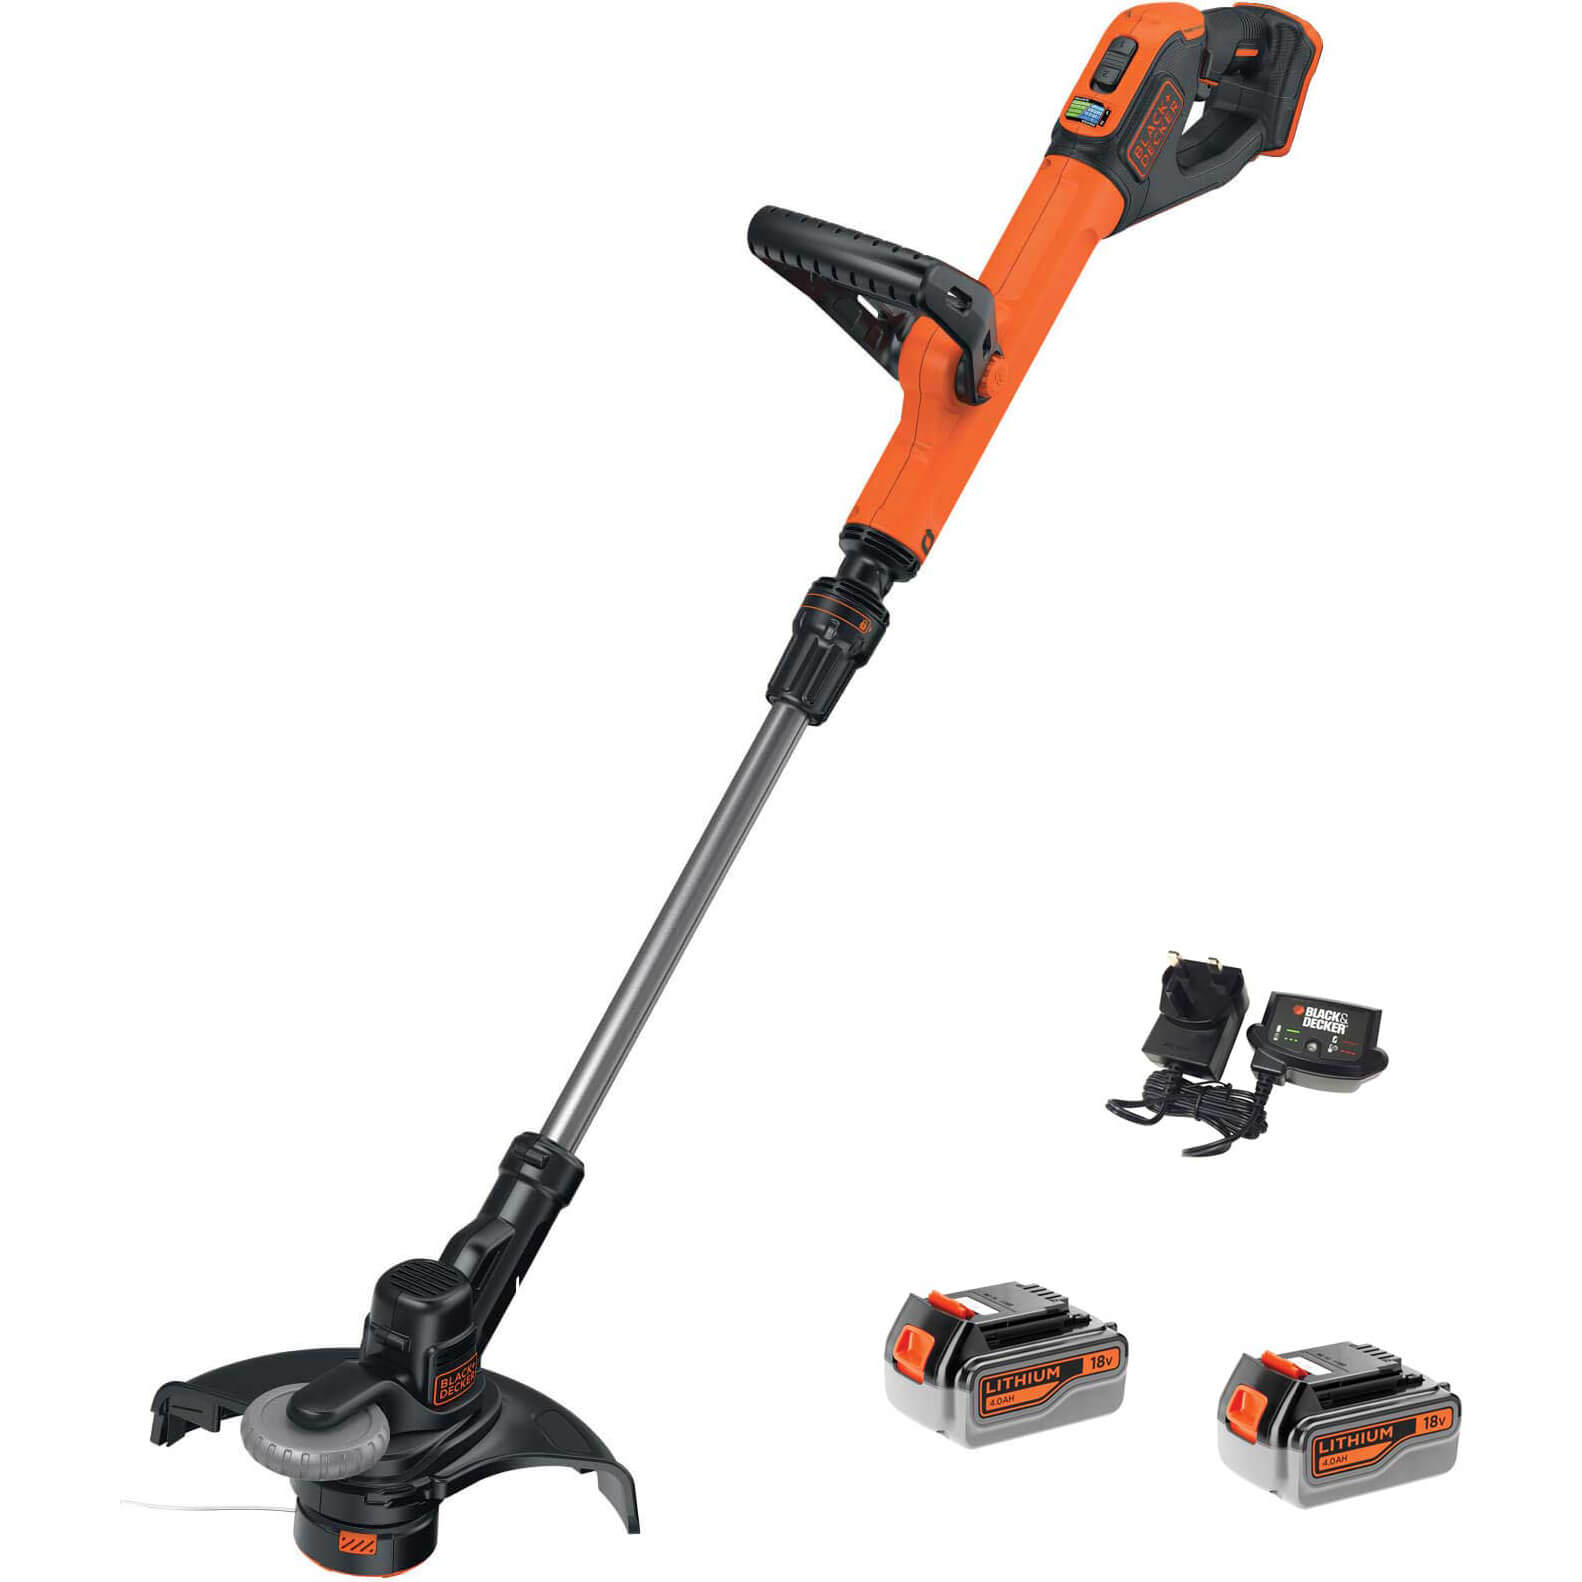 Image of Black and Decker STC1820PC 18v Cordless Grass Trimmer 280mm 2 x 4ah Li-ion Charger